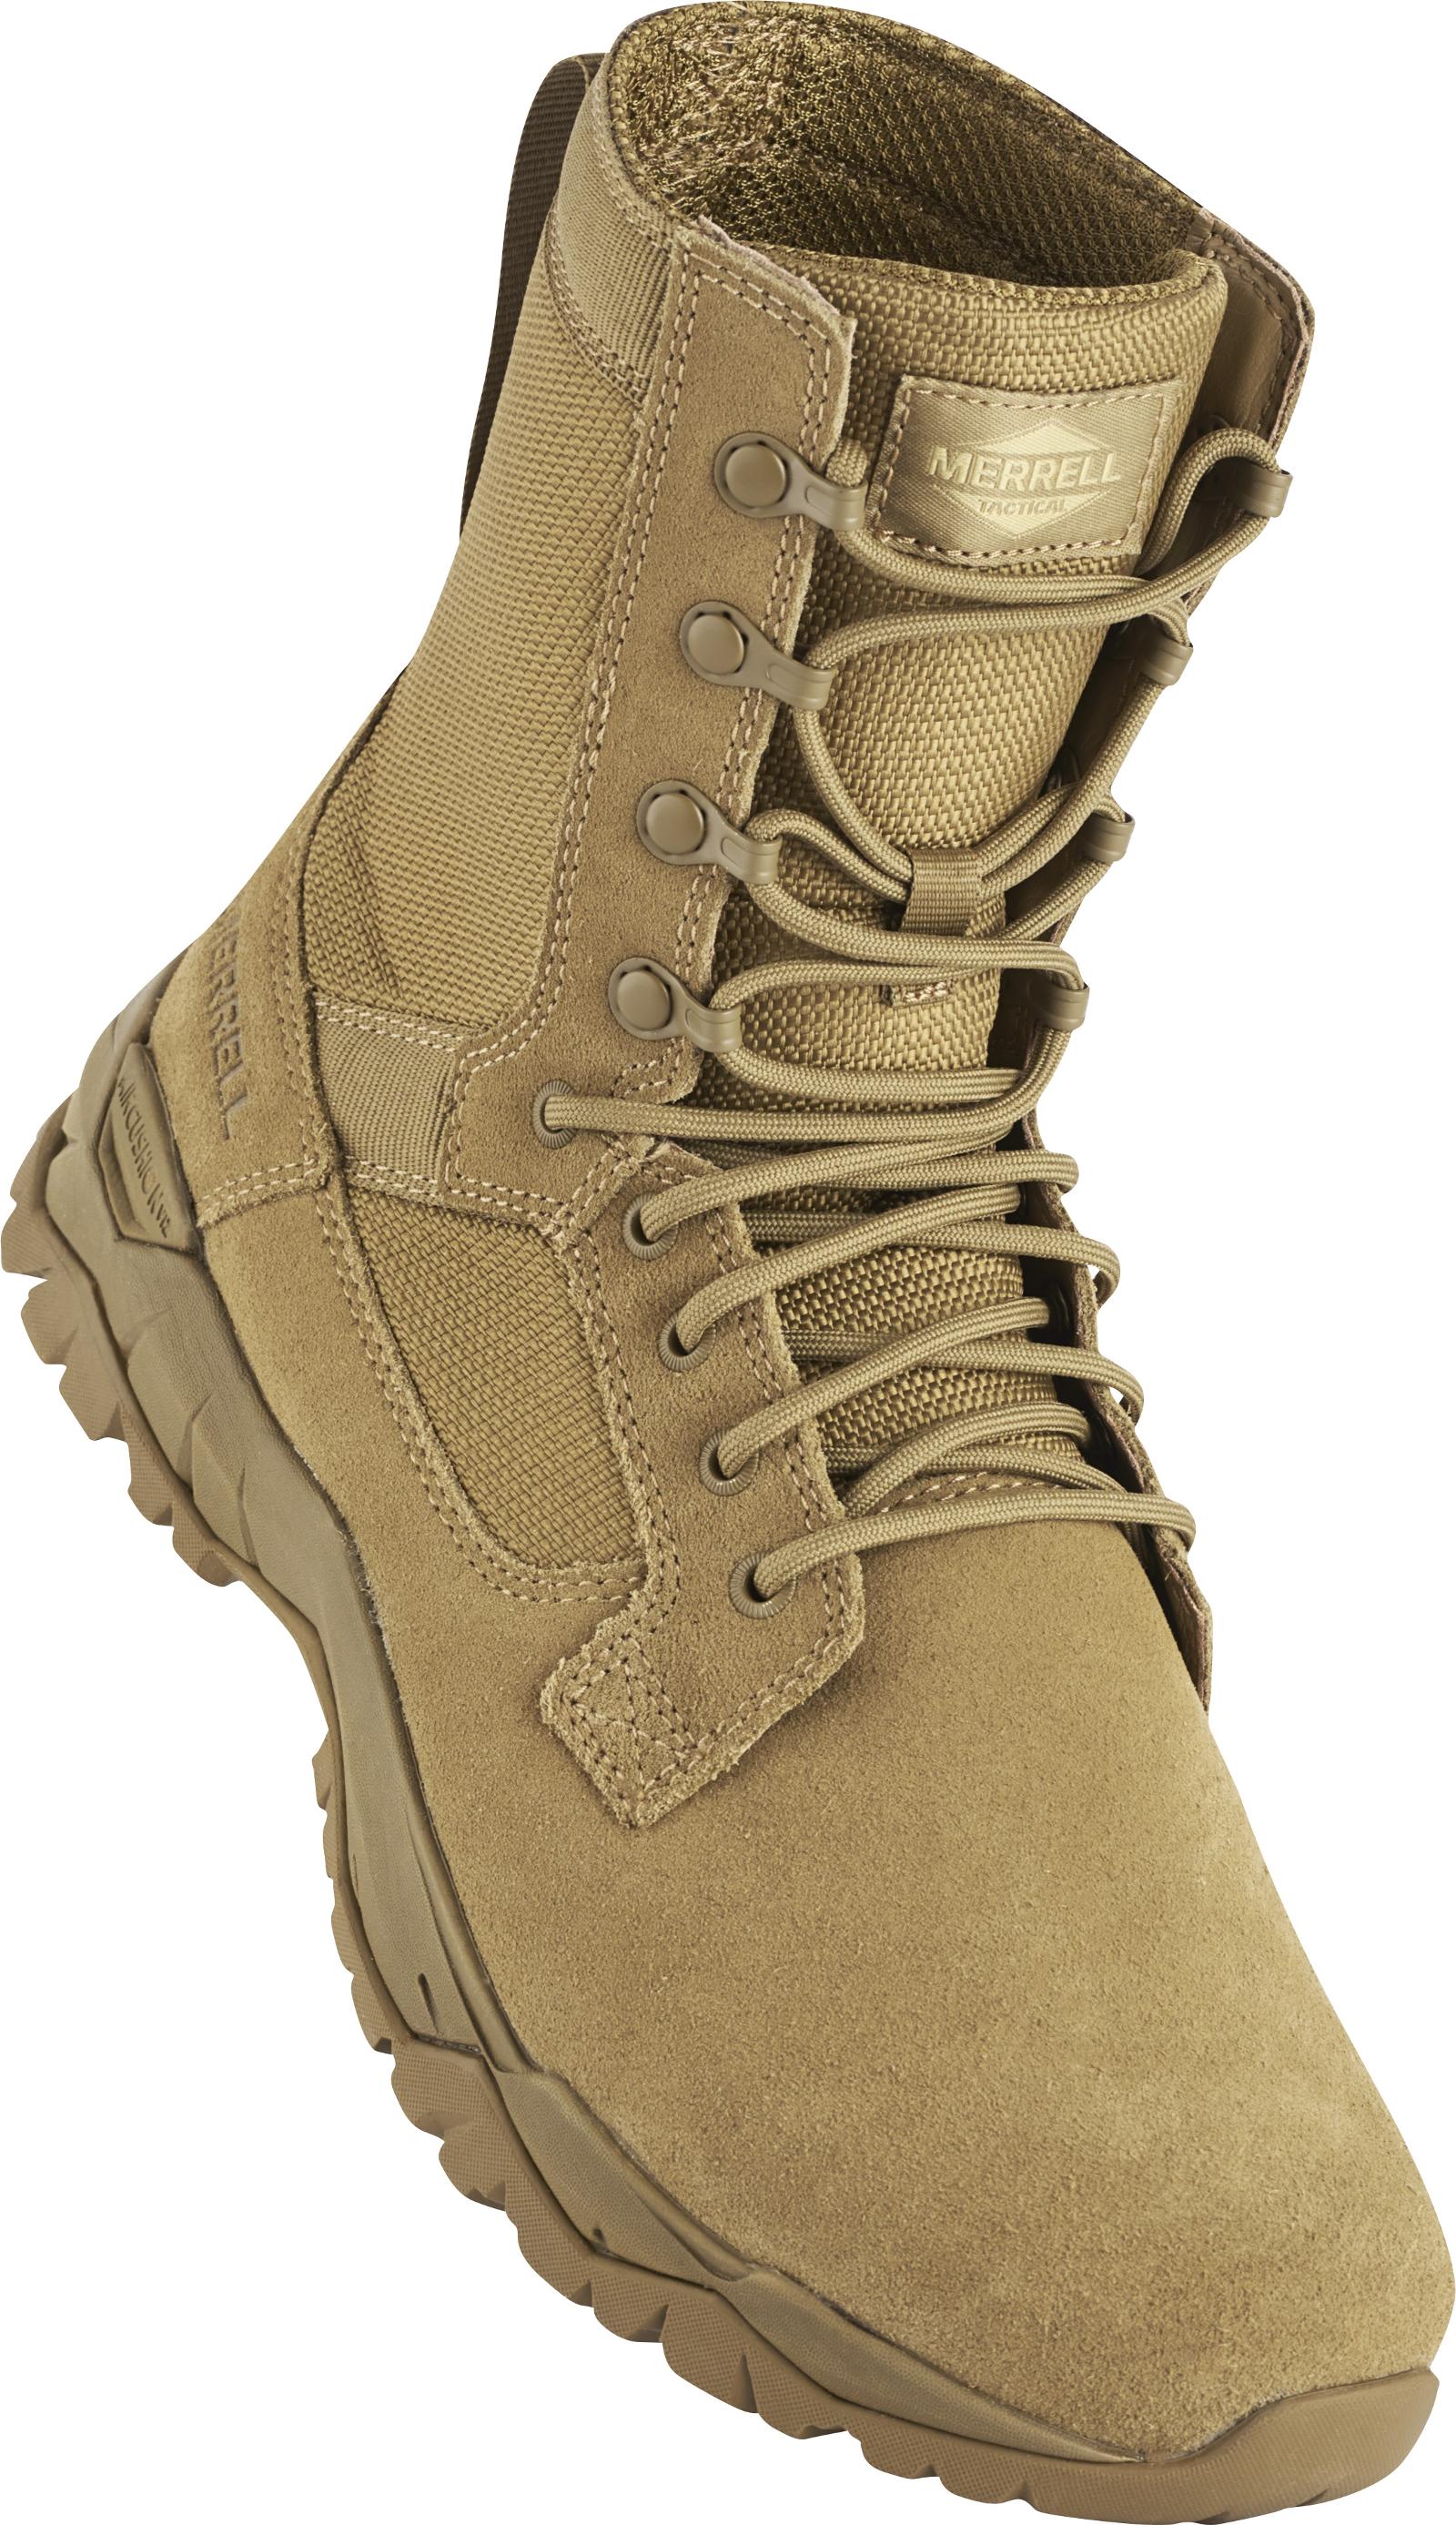 String string produceren factor MERRELL BOOTS 8" MQC TACTICAL - J099375 - Tactical Boots - Defcon 5 Italy